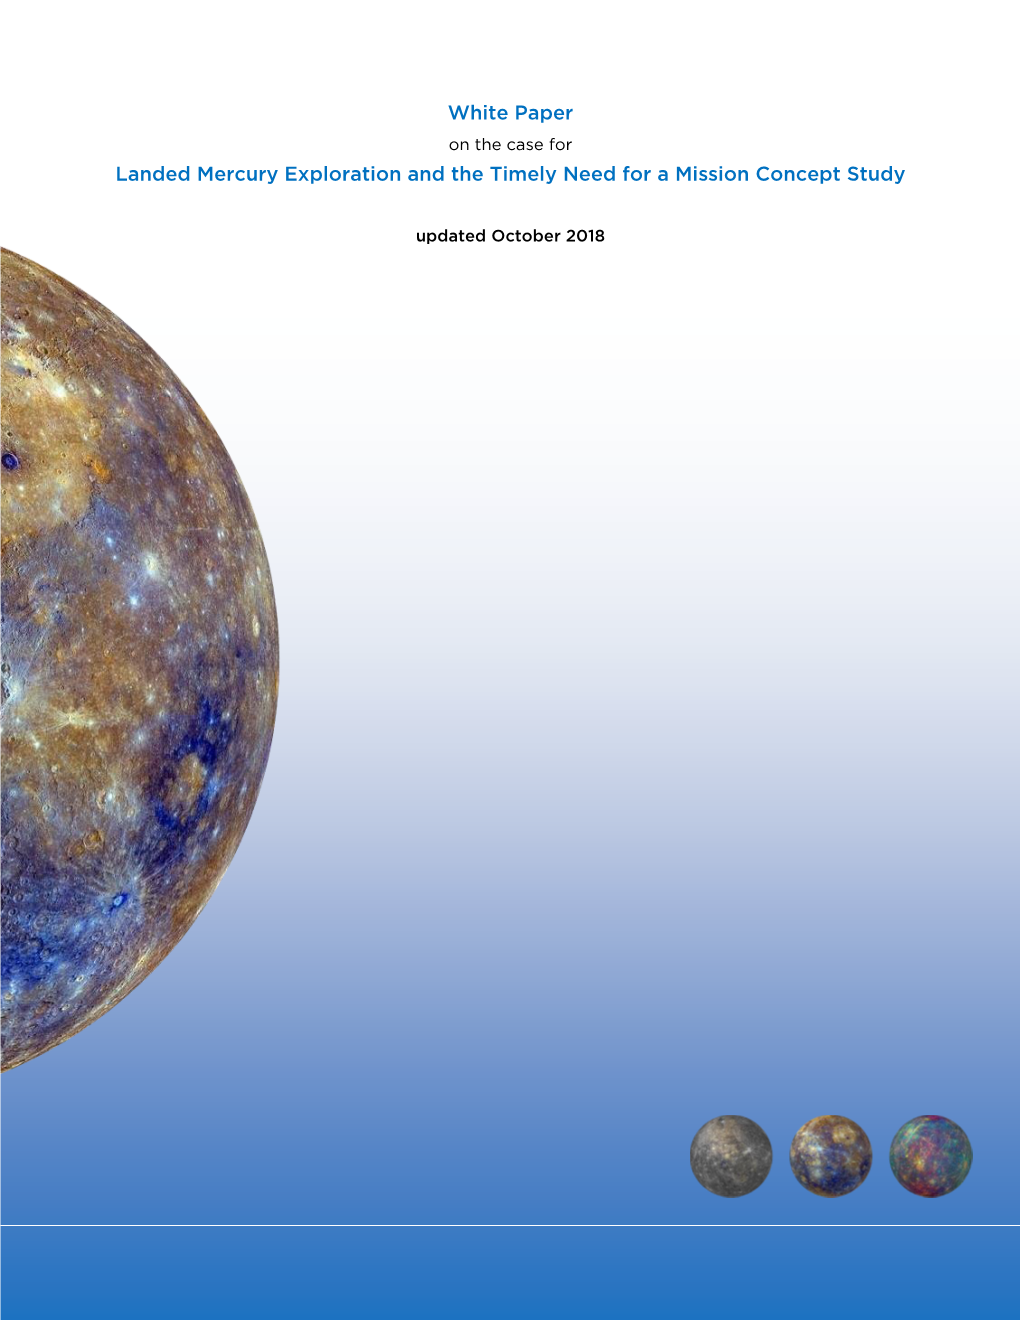 White Paper on the Case for Landed Mercury Exploration and the Timely Need for a Mission Concept Study